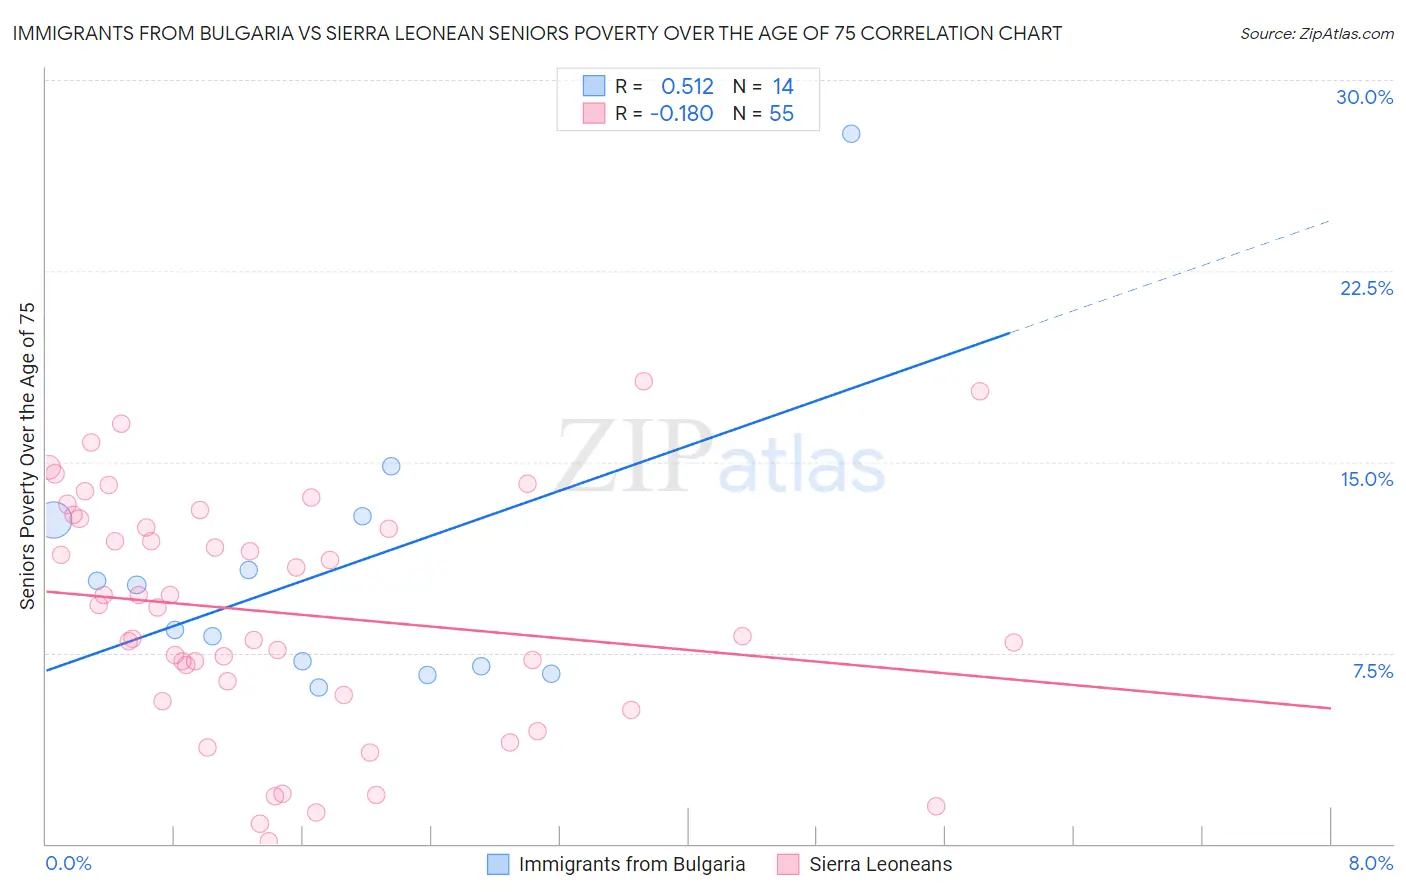 Immigrants from Bulgaria vs Sierra Leonean Seniors Poverty Over the Age of 75